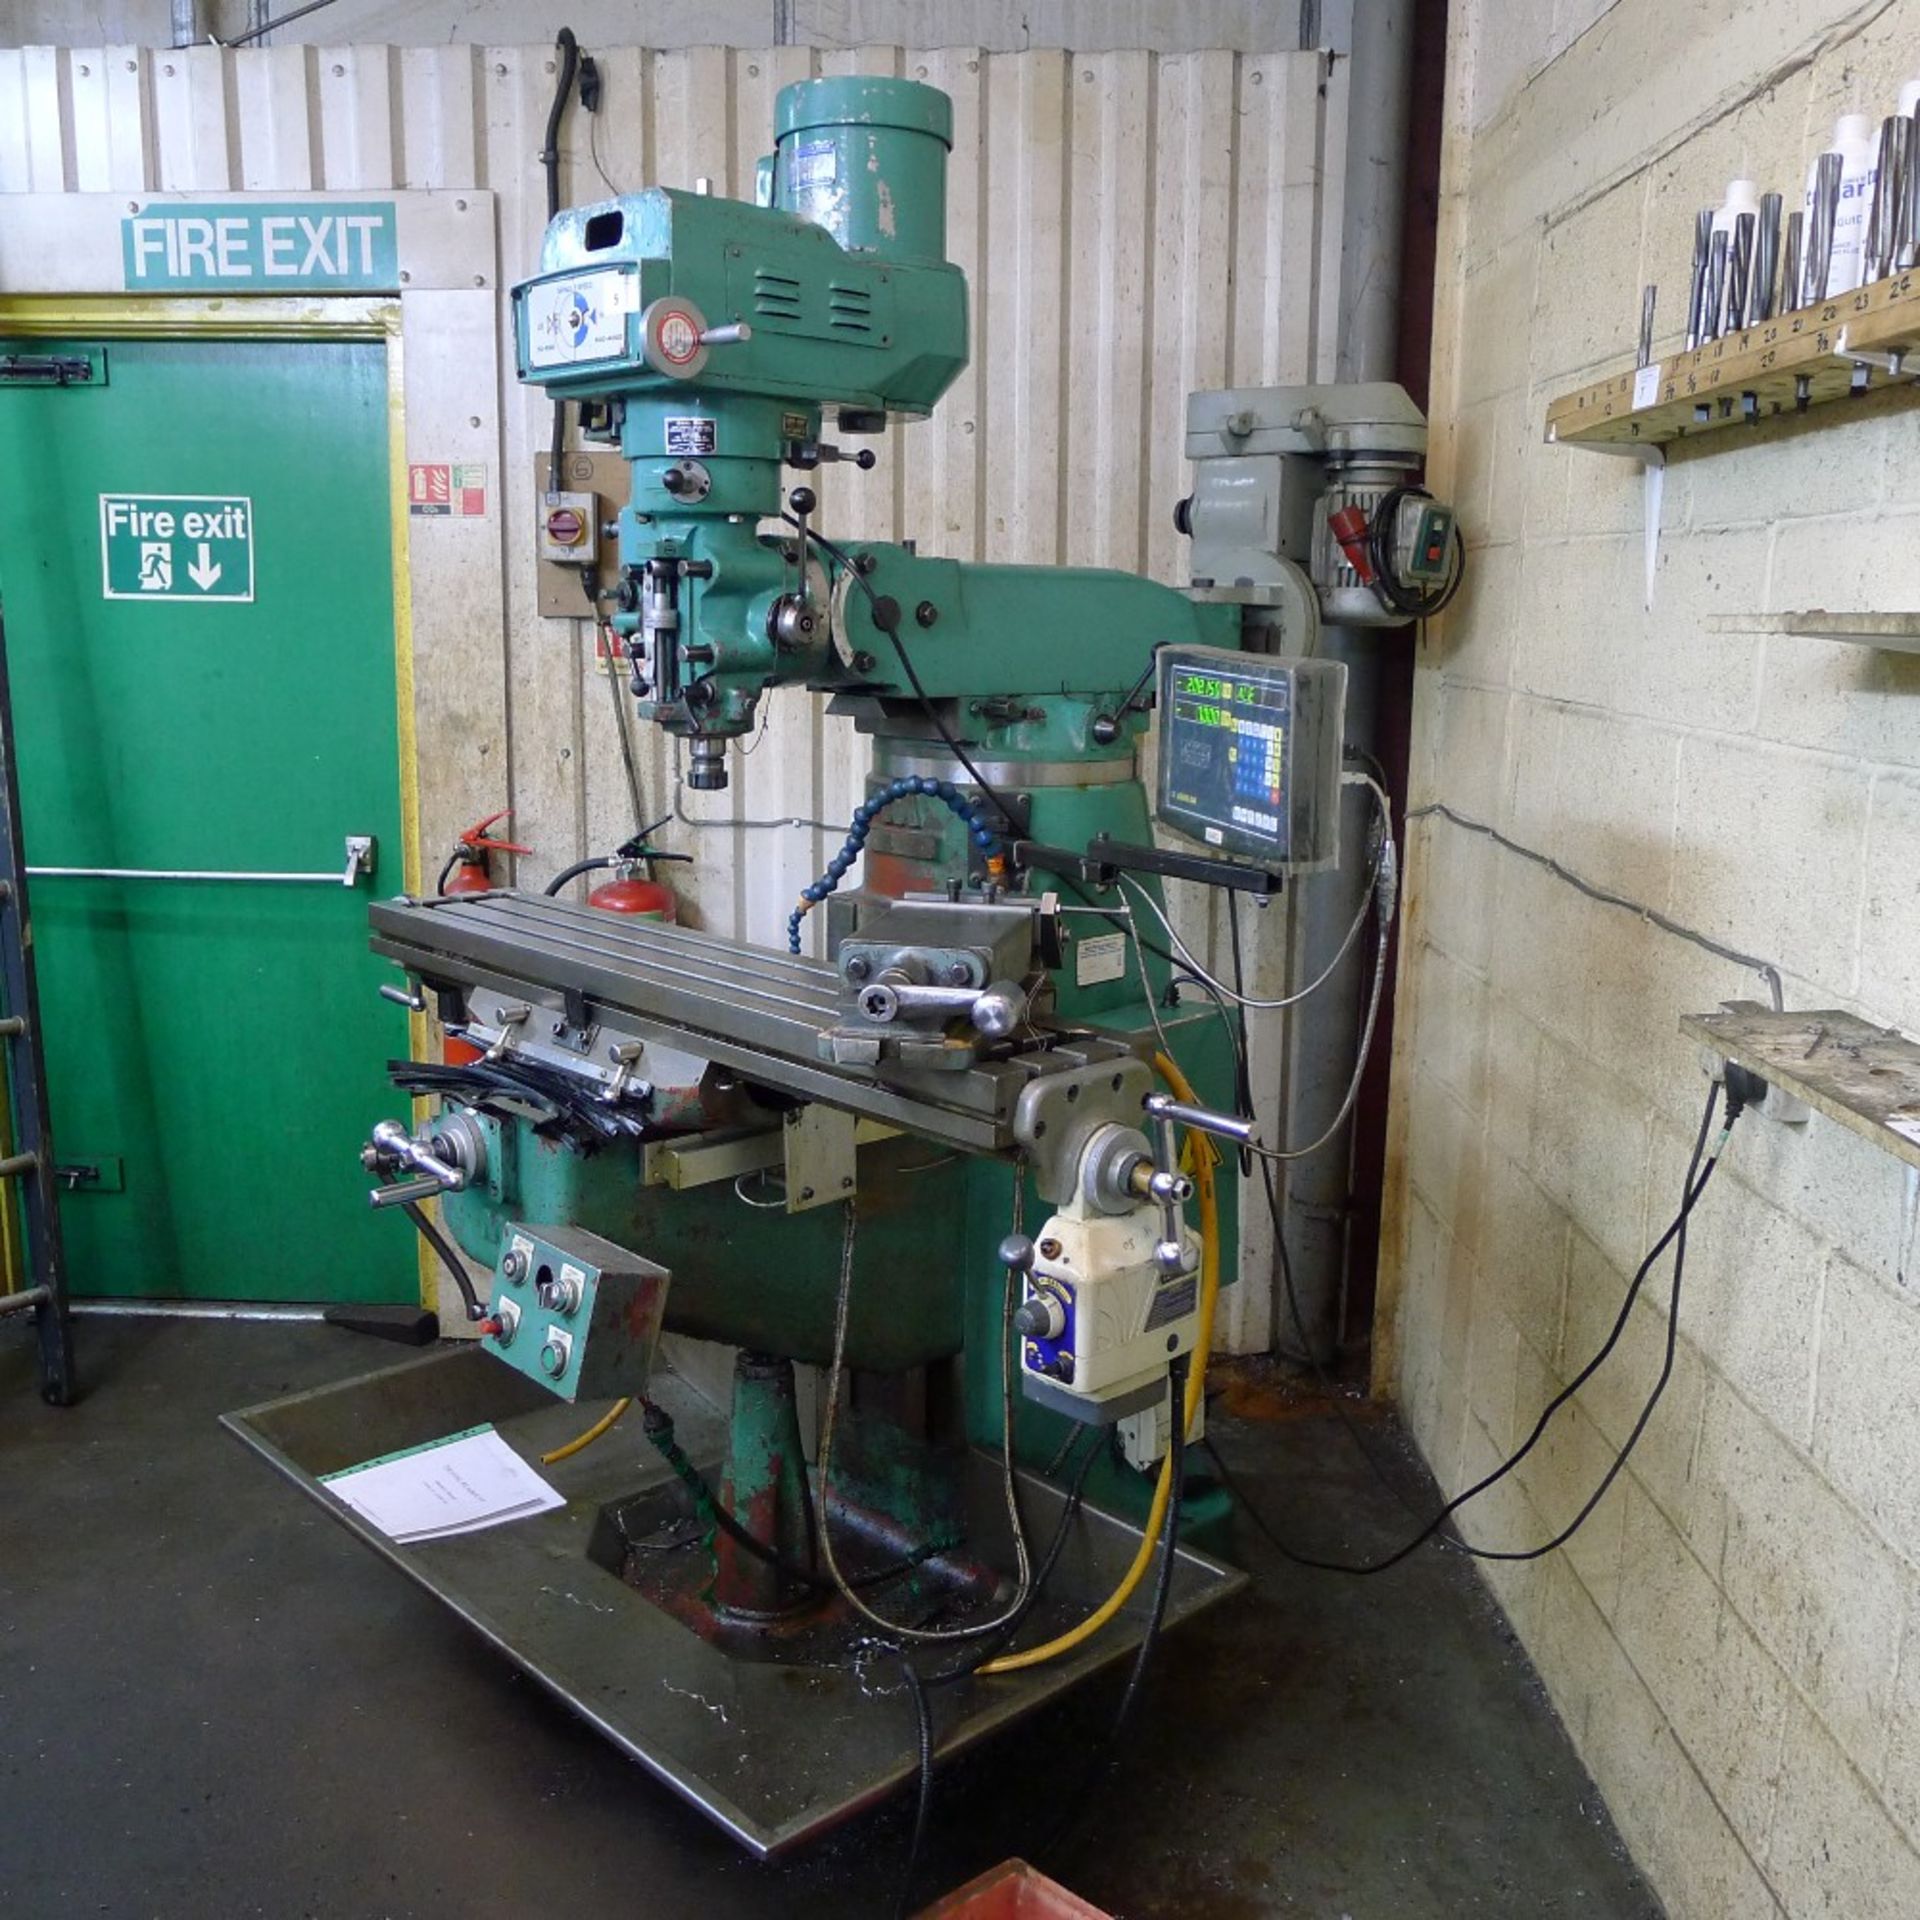 1 milling machine by Widdowsons (Bridgeport type) 3ph, table size 1.25m x 23cm, 830mm x 450mm - Image 2 of 12